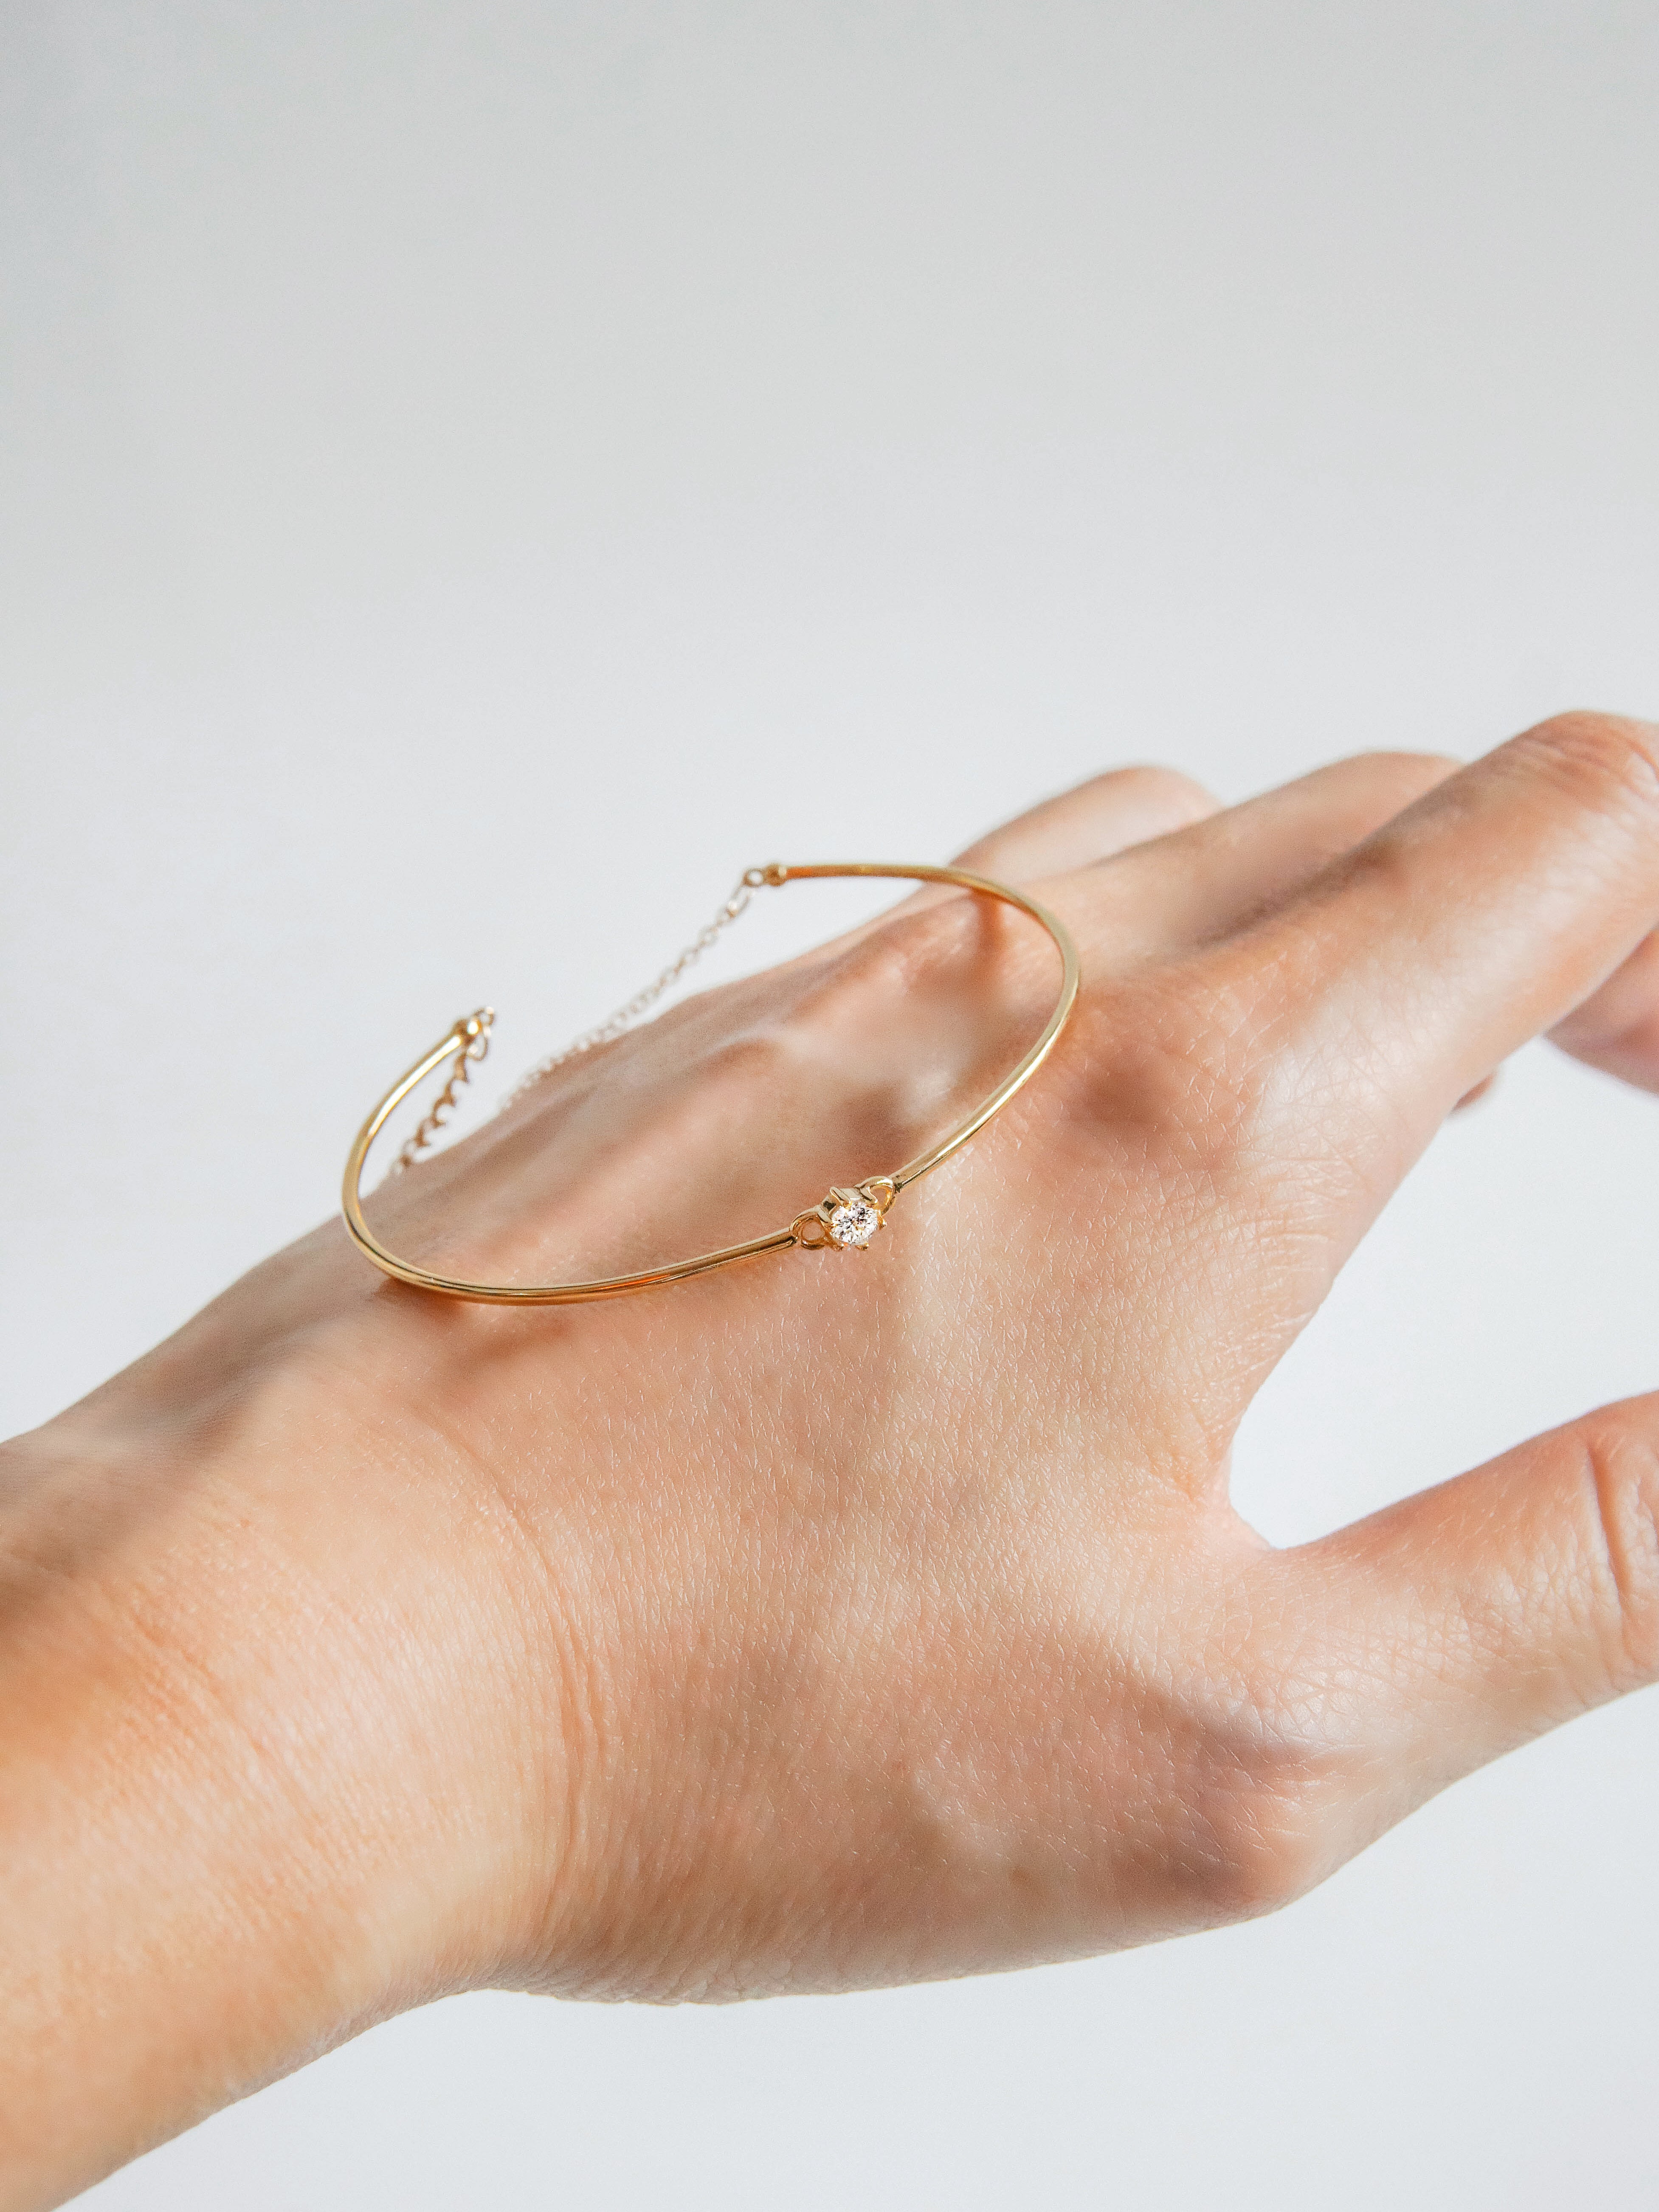 Tender Objects' Tennis Demi Bracelet - A graceful accessory echoing the spirit of the court.